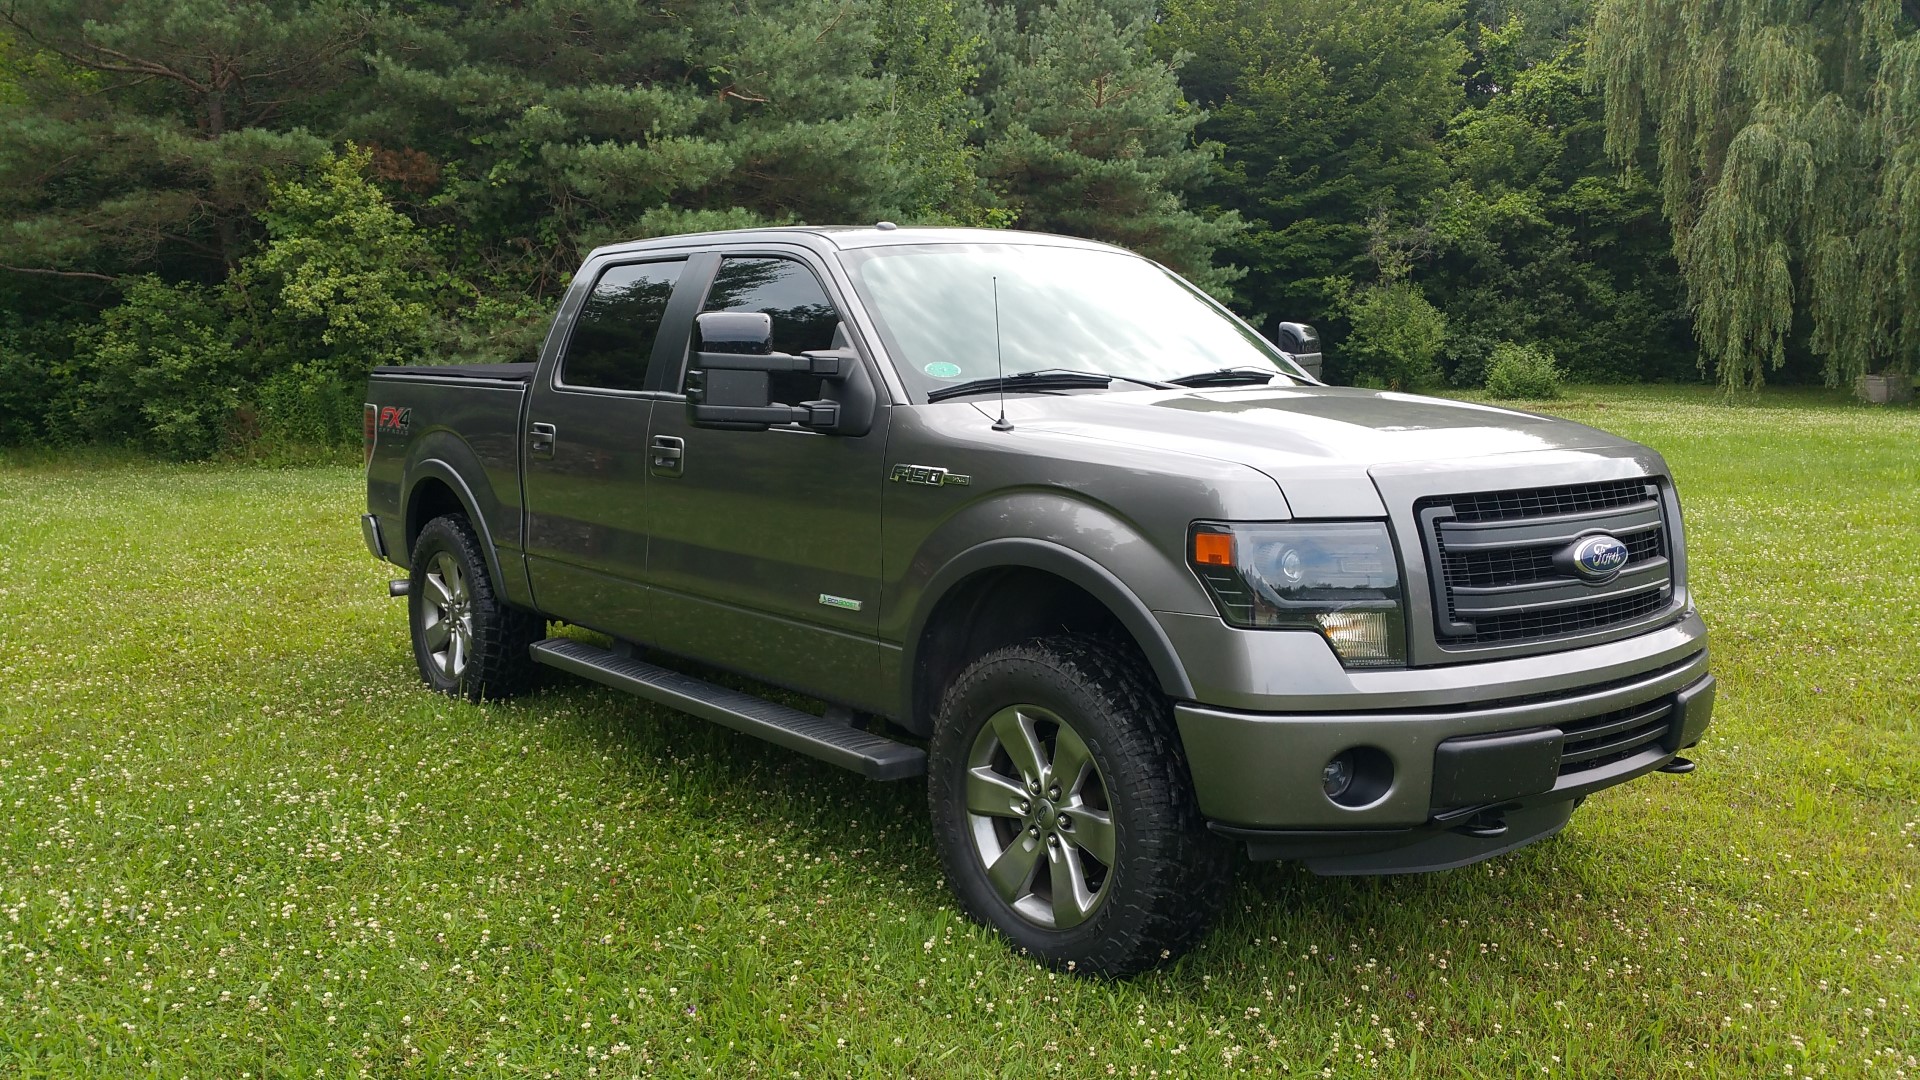 2013 F150 Ecoboost FX4 402a loaded $27,000 - F150online Forums